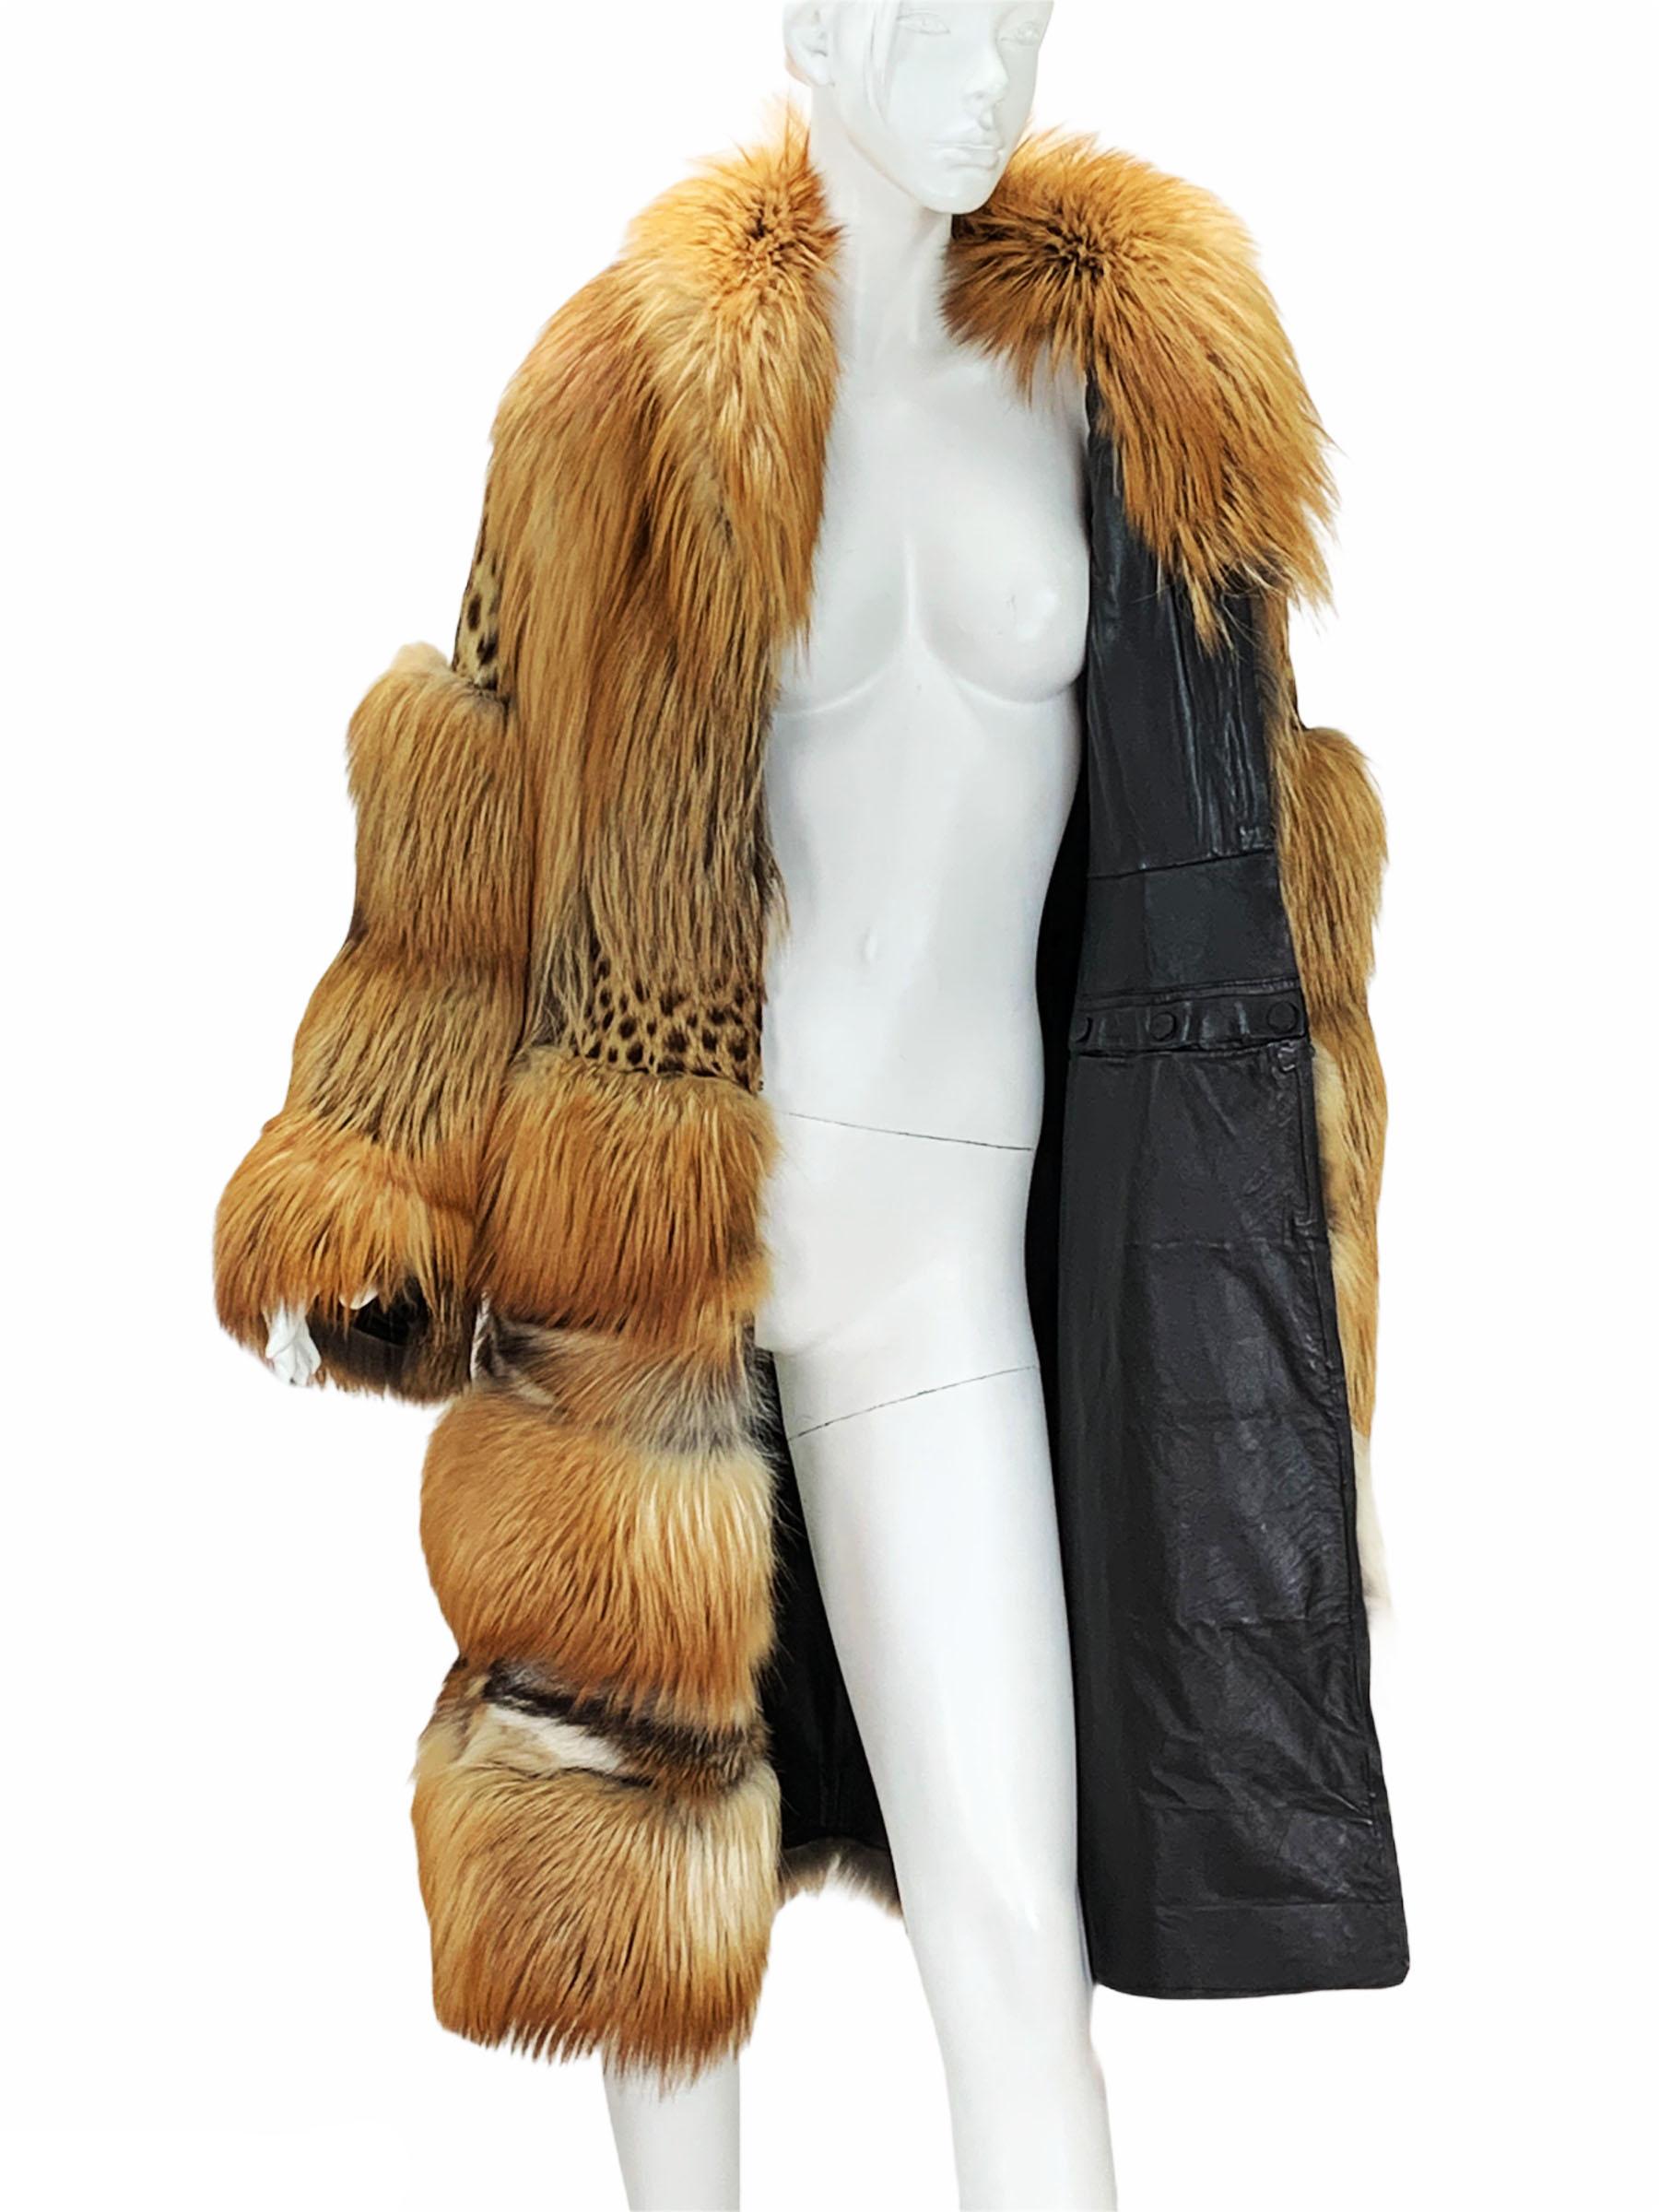 Museum Tom Ford for Gucci Runway F/W 1999 2 in 1 Fur Coat Jacket  For Sale 6